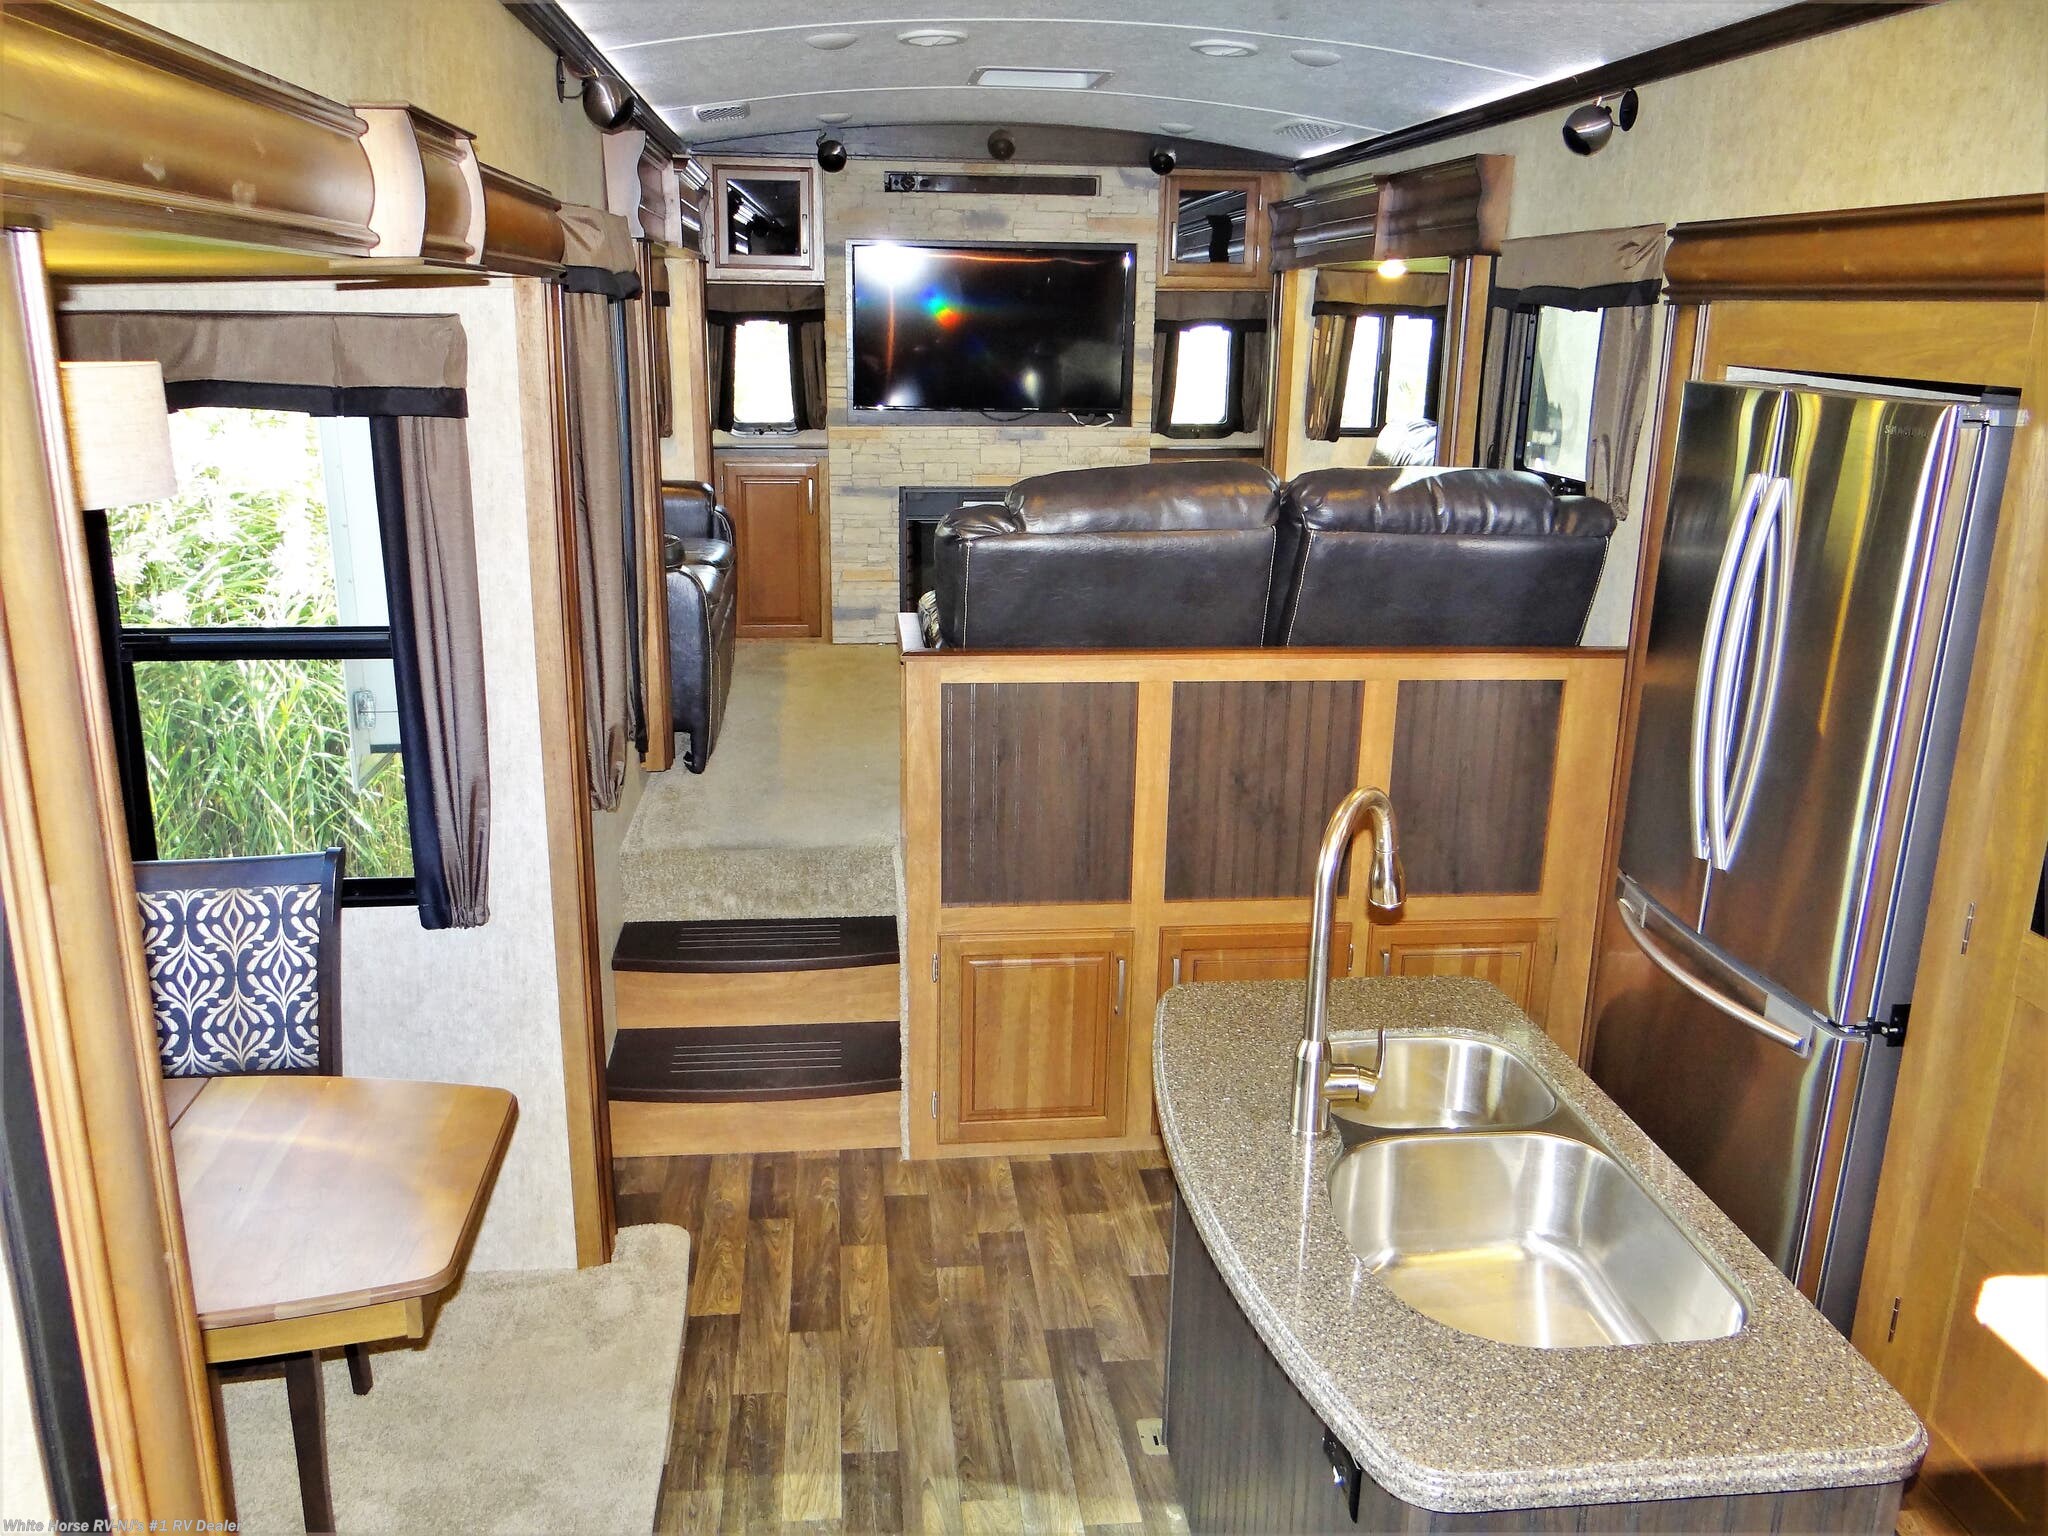 2016 Keystone Rv Montana 3791rd Rear Living Five Slides King Bed For Sale In Williamstown Nj 08094 P12753